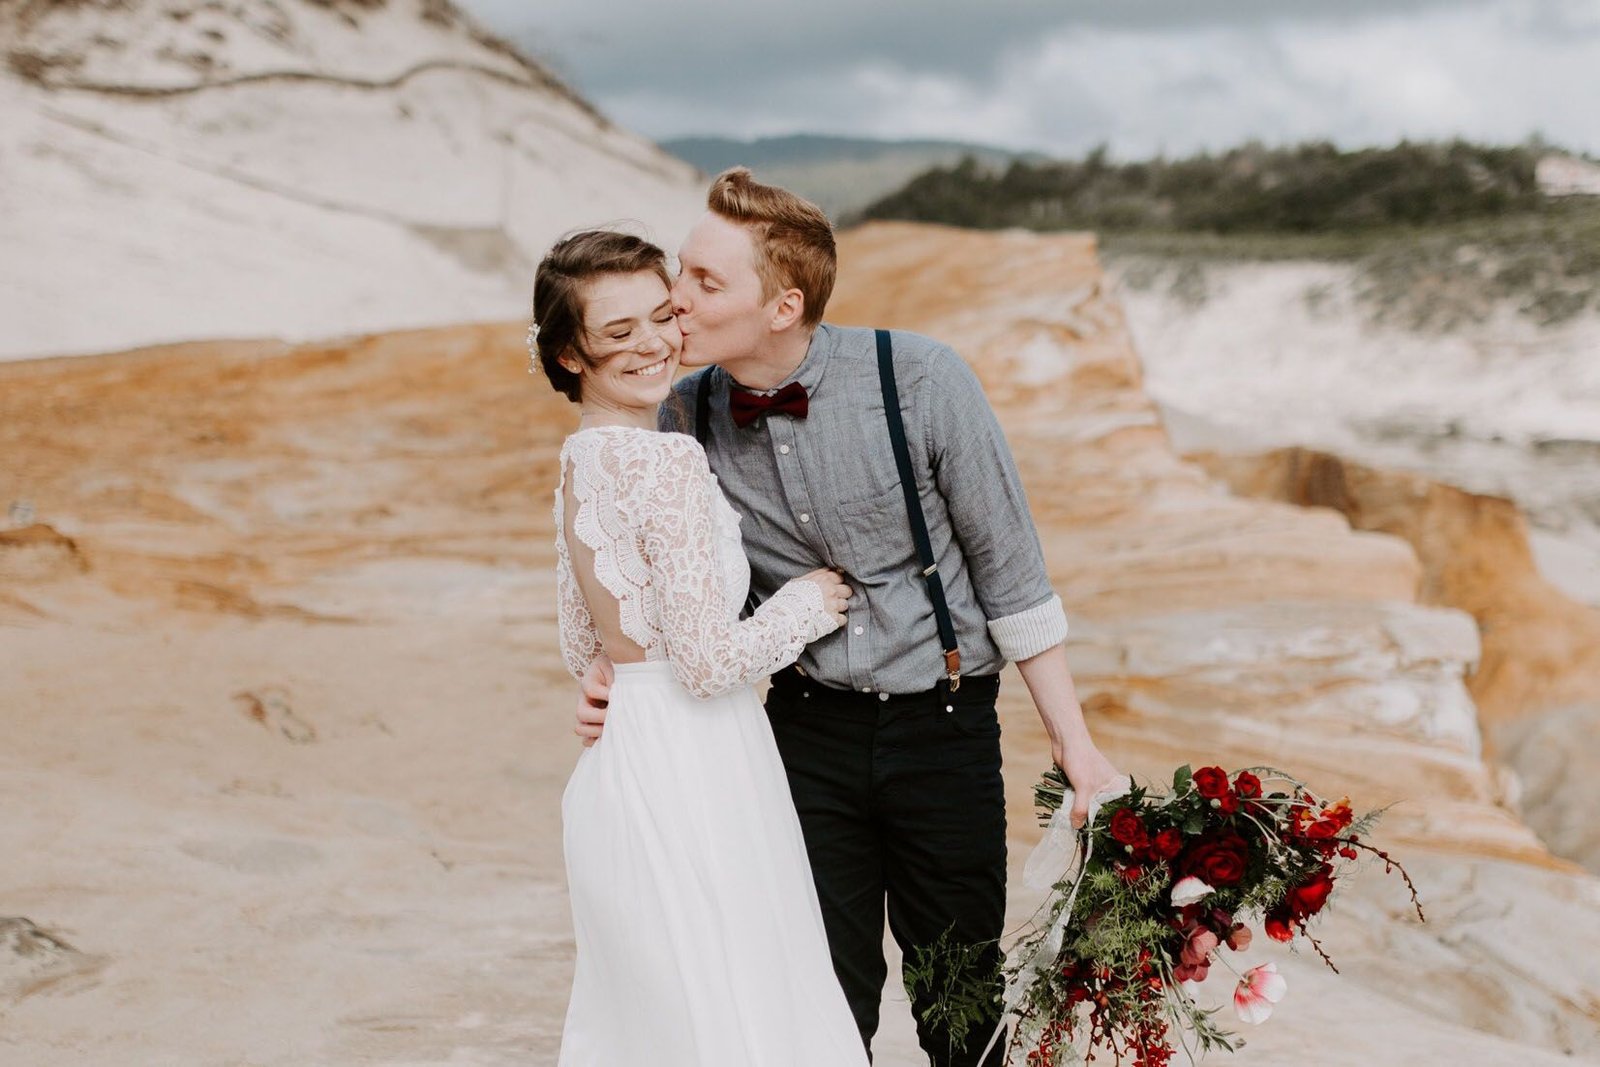 8 Tips for Collaborating with Wedding Photographers on Your Themed Wedding